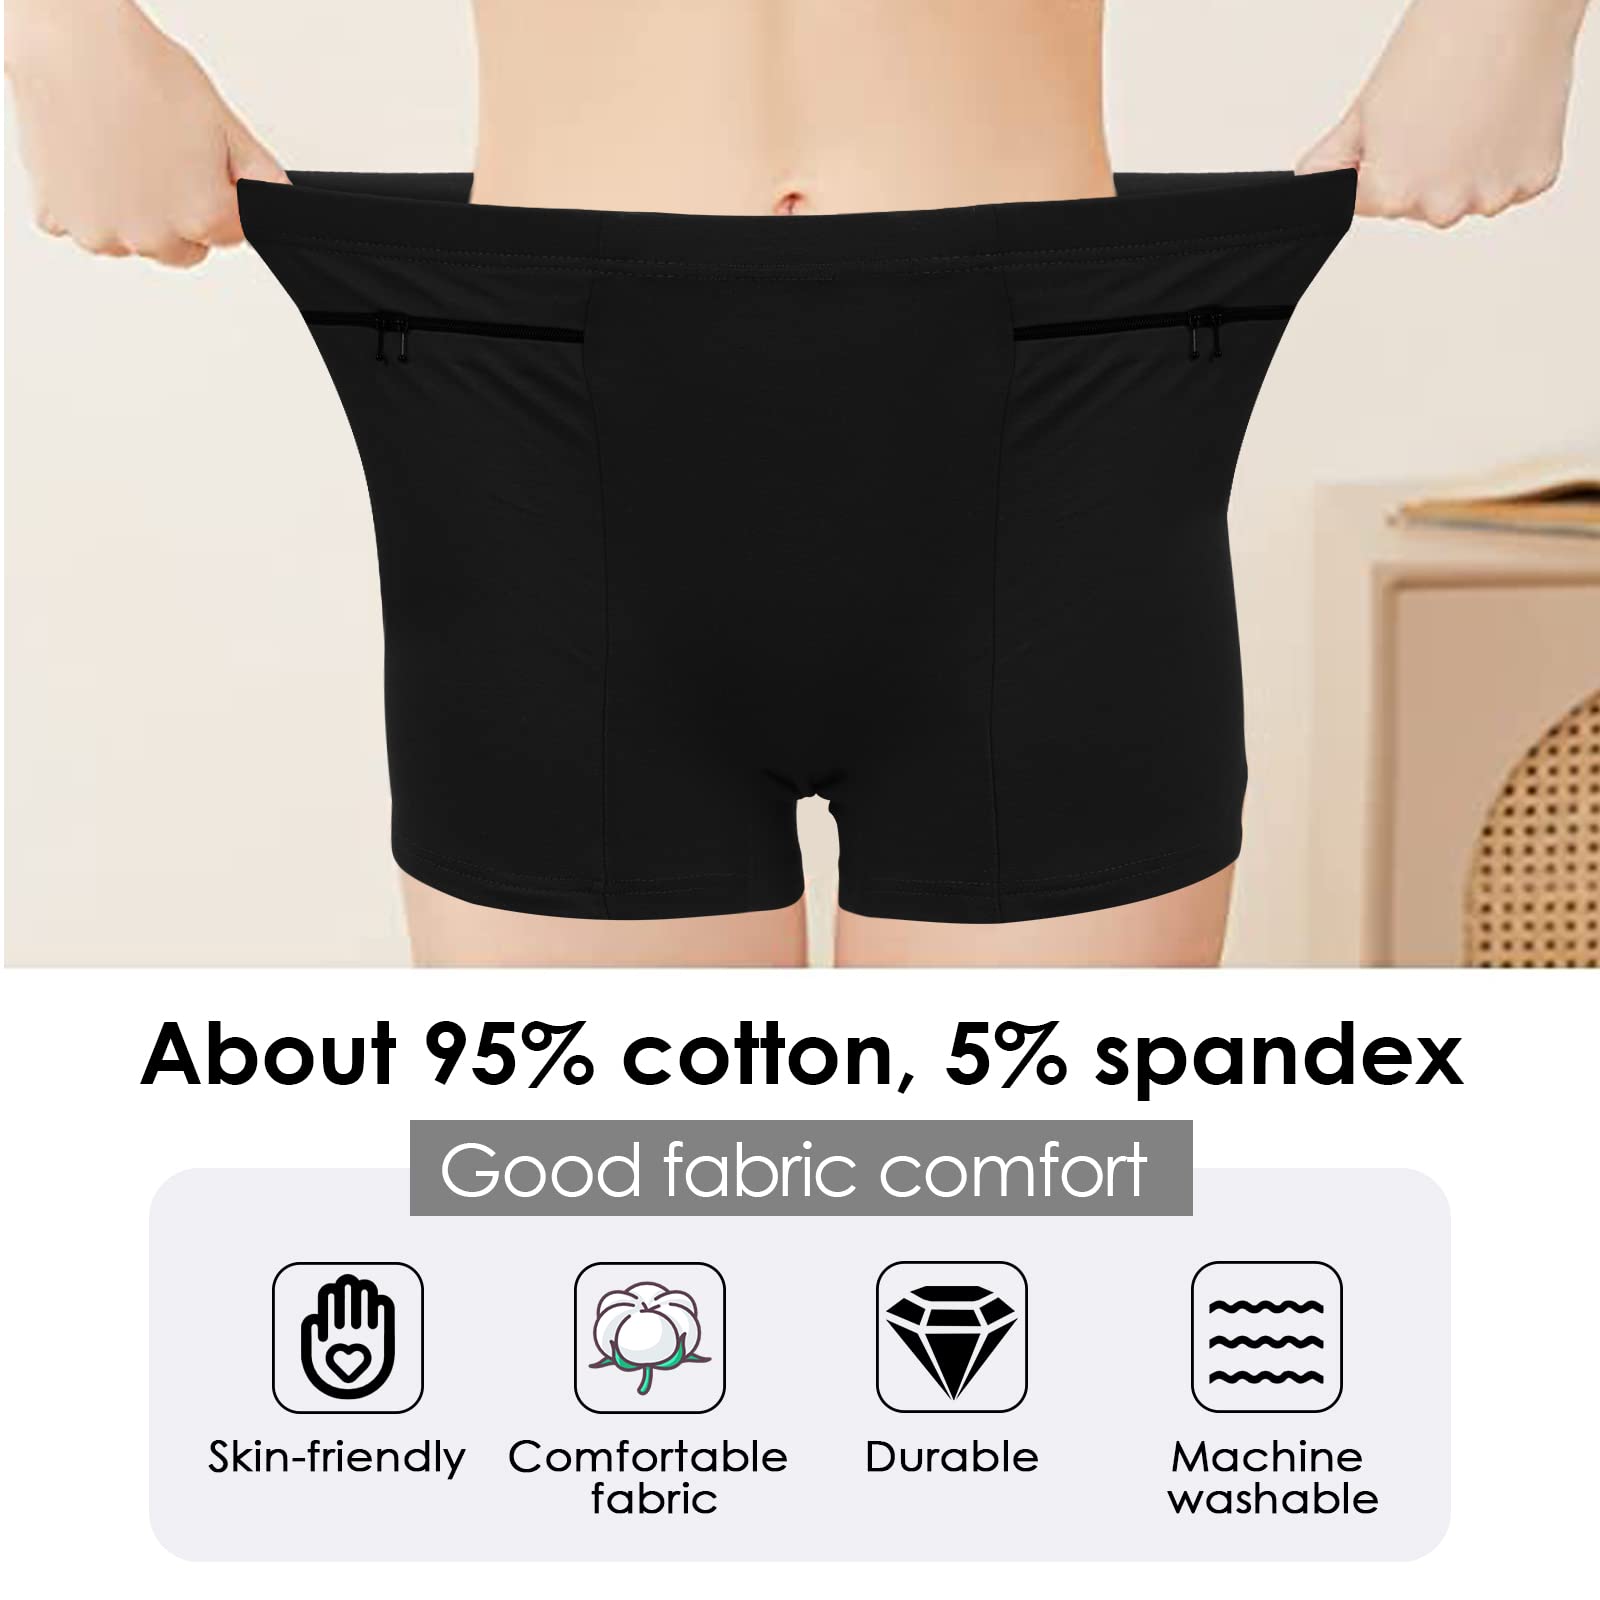 Pickpocket and Loss Proof Womens Cotton Underwear with Hidden